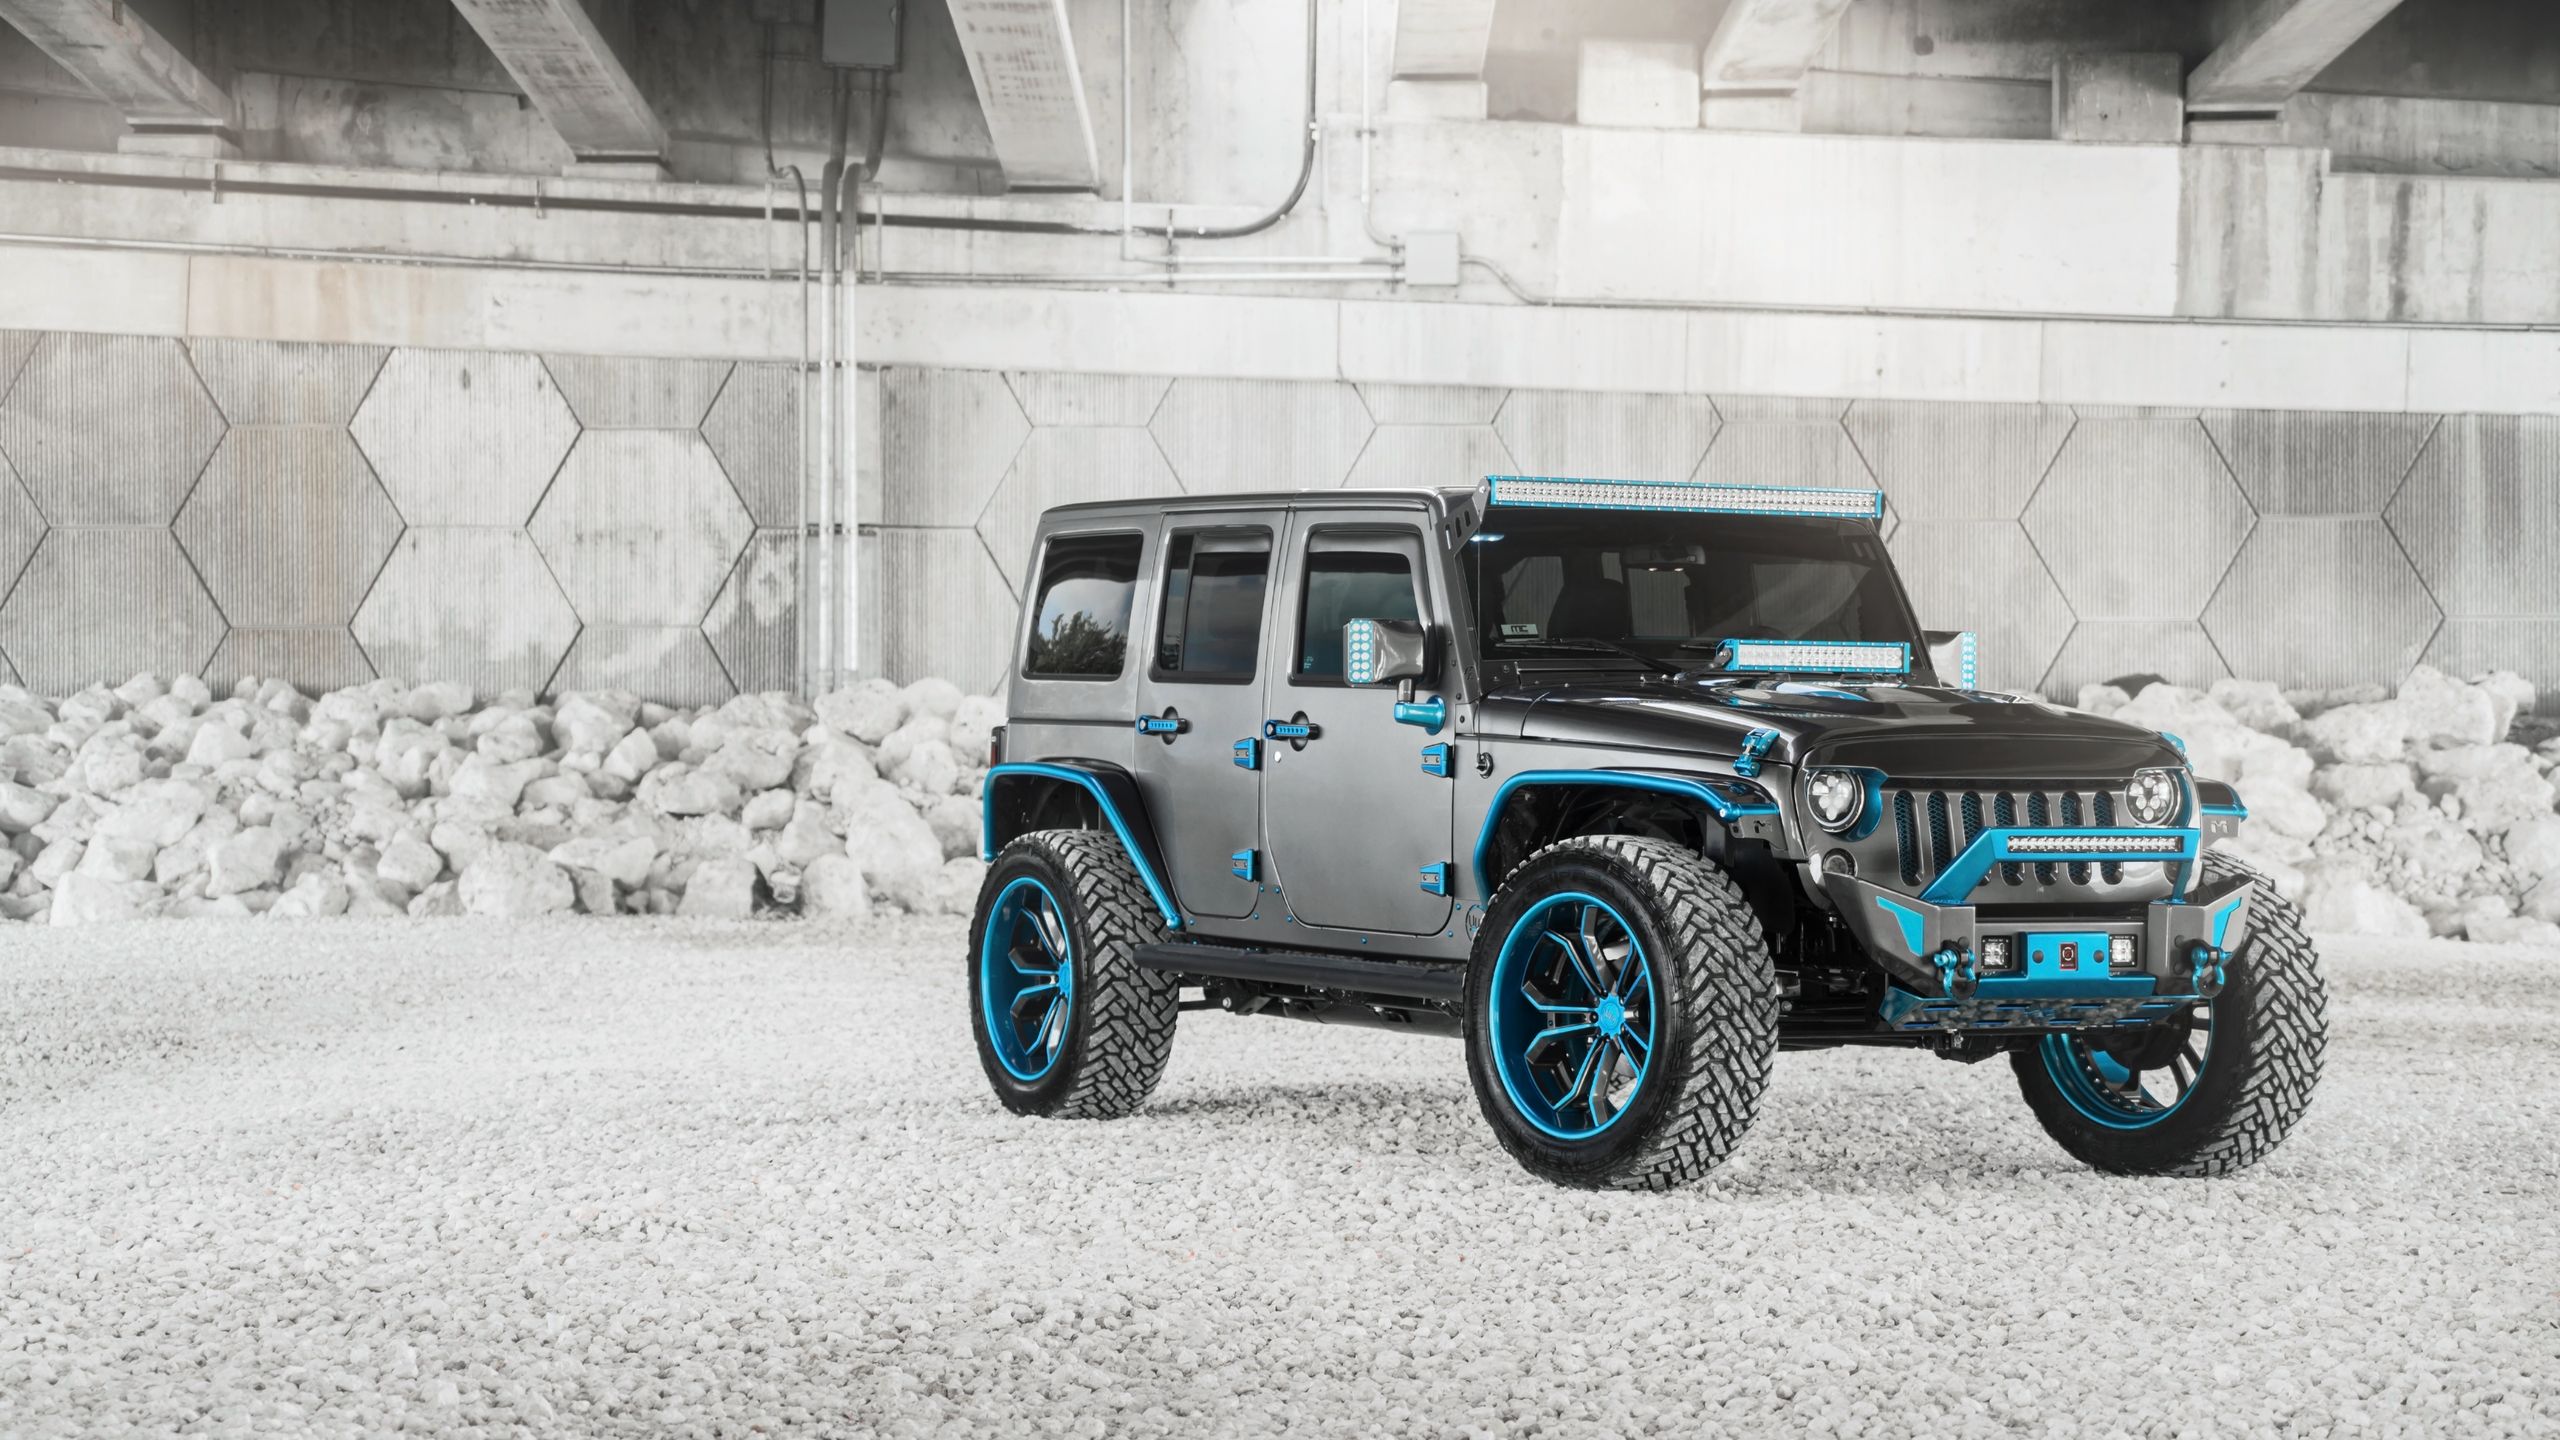 Wallpaper Thar Jeep Image Download